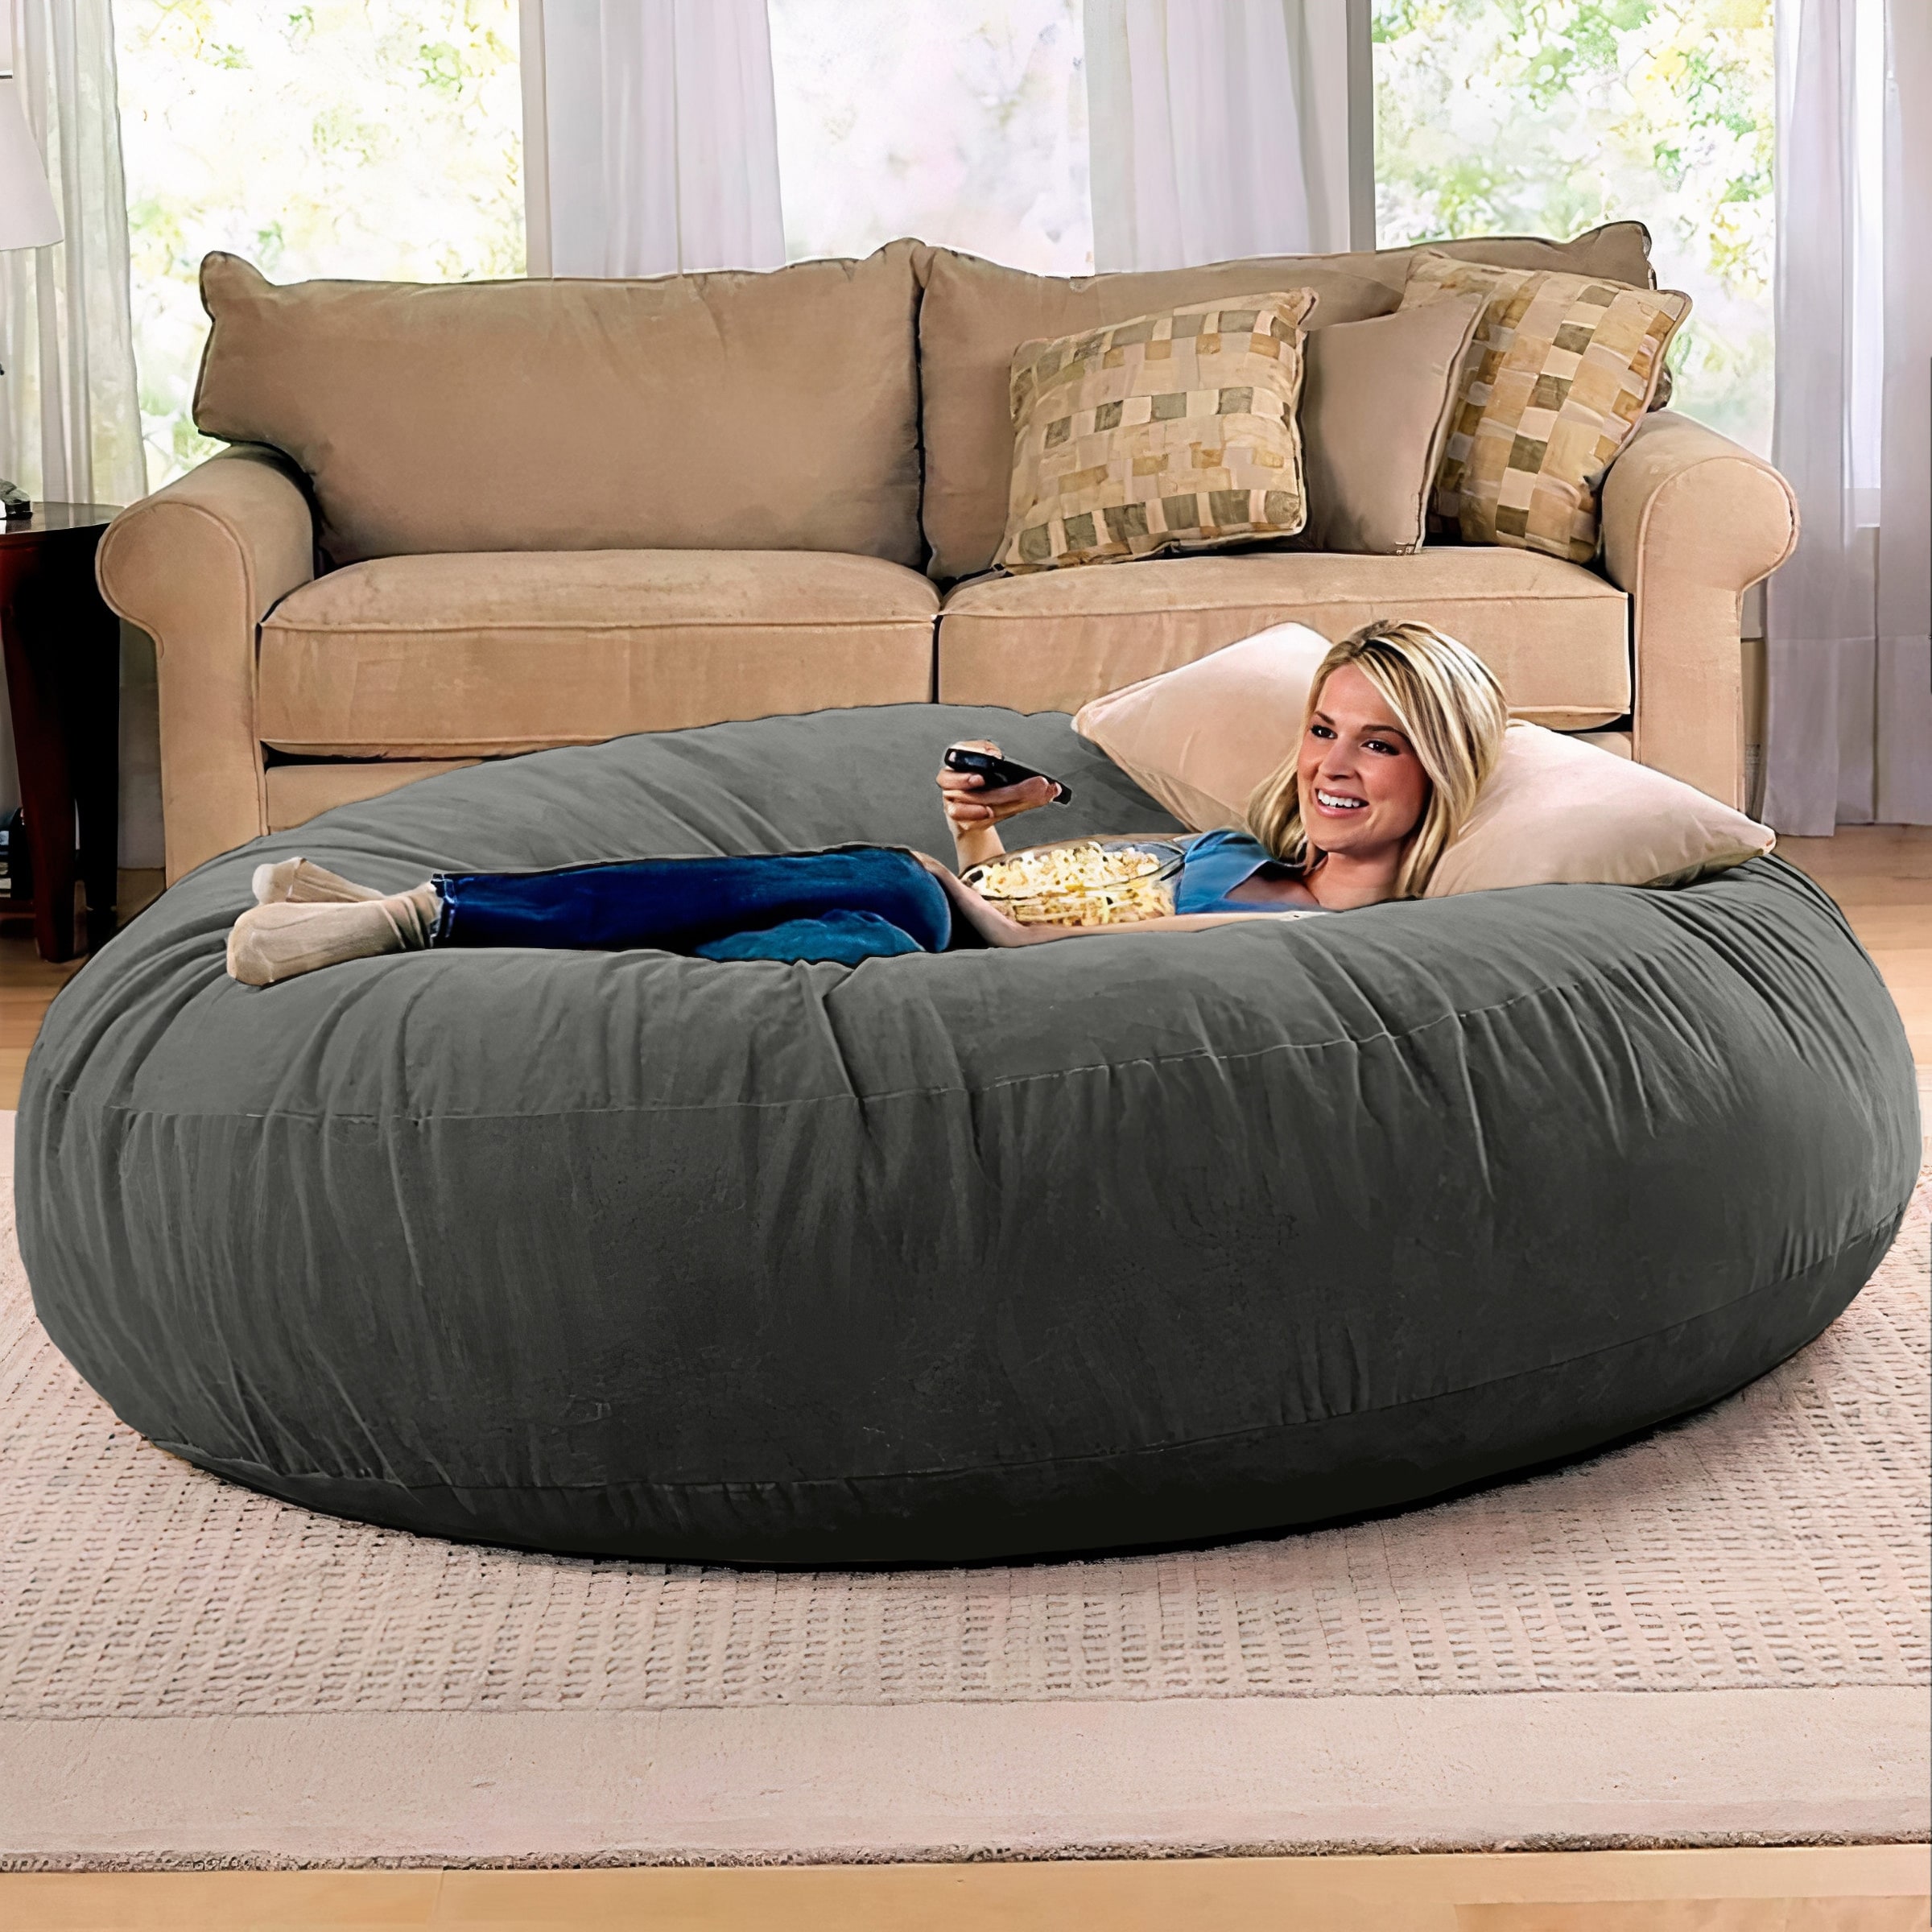 Moon Pod review: Is it the best bean bag chair out there? - Reviewed